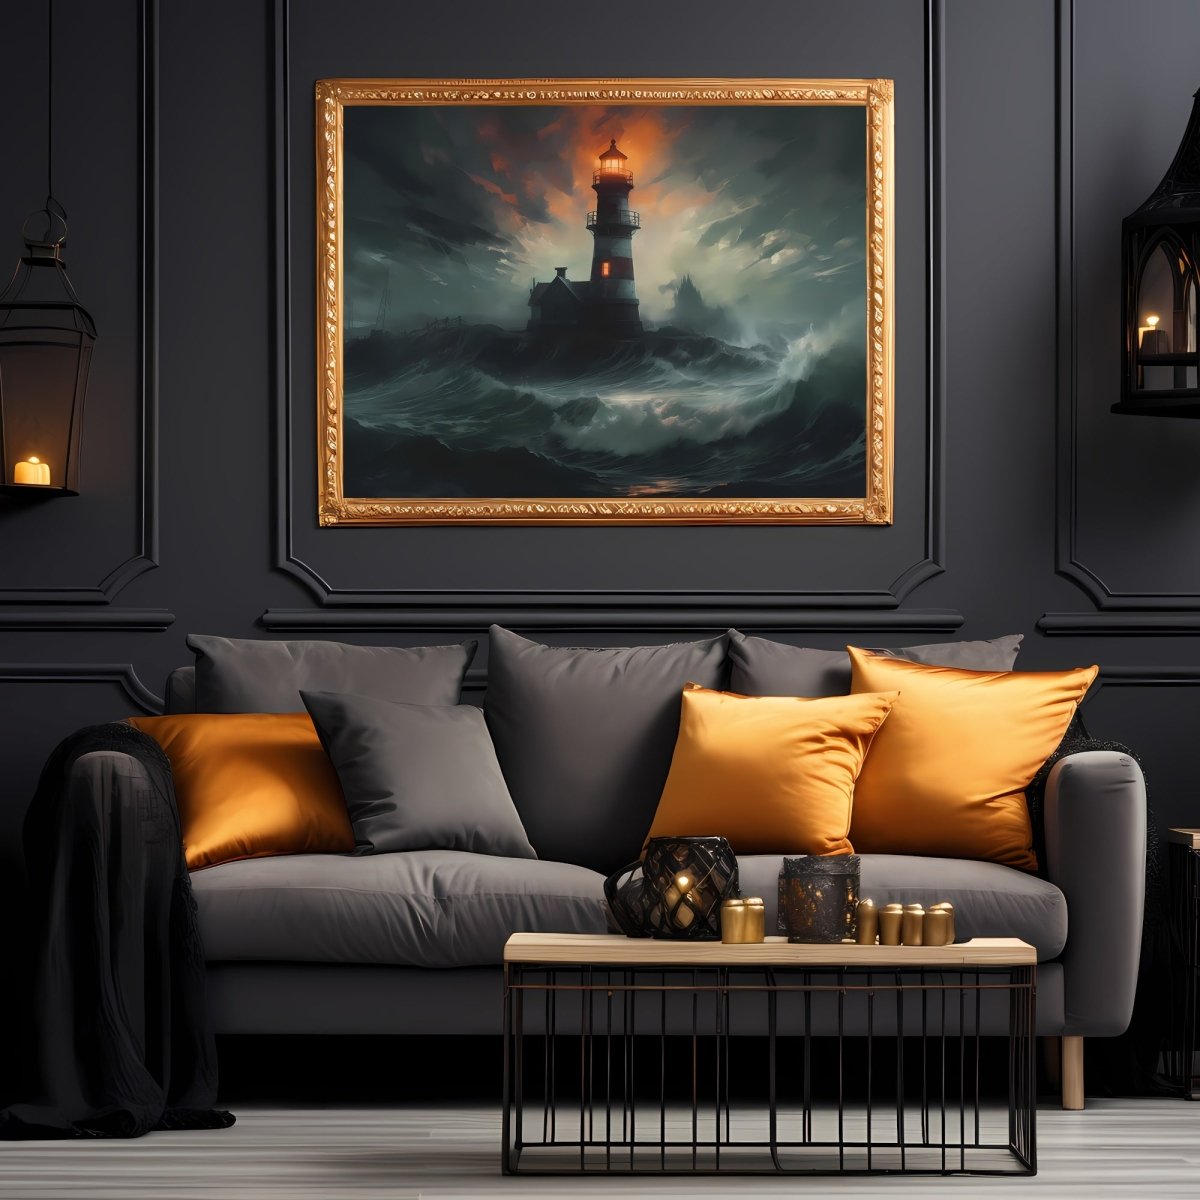 Lighthouse in Stormy Sea Gothic Wall Art Paper Poster Prints Vintage Seascape Painting Dark Academia Print Dark Aesthetic Room Decor Nautical Artwork - Everything Pixel